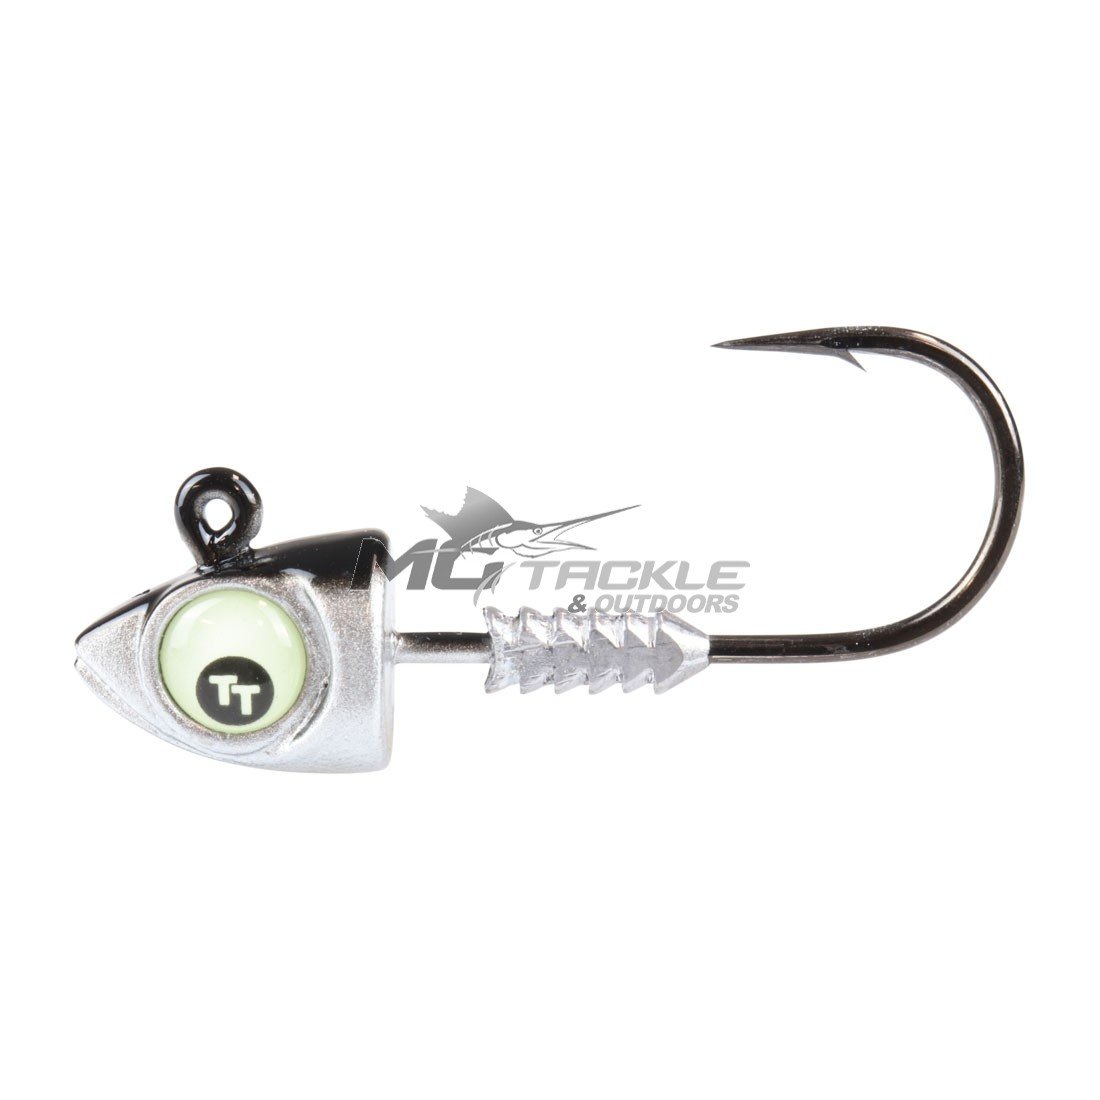 TT Lures Weedless Rig Value Pack – Tackle Tactics